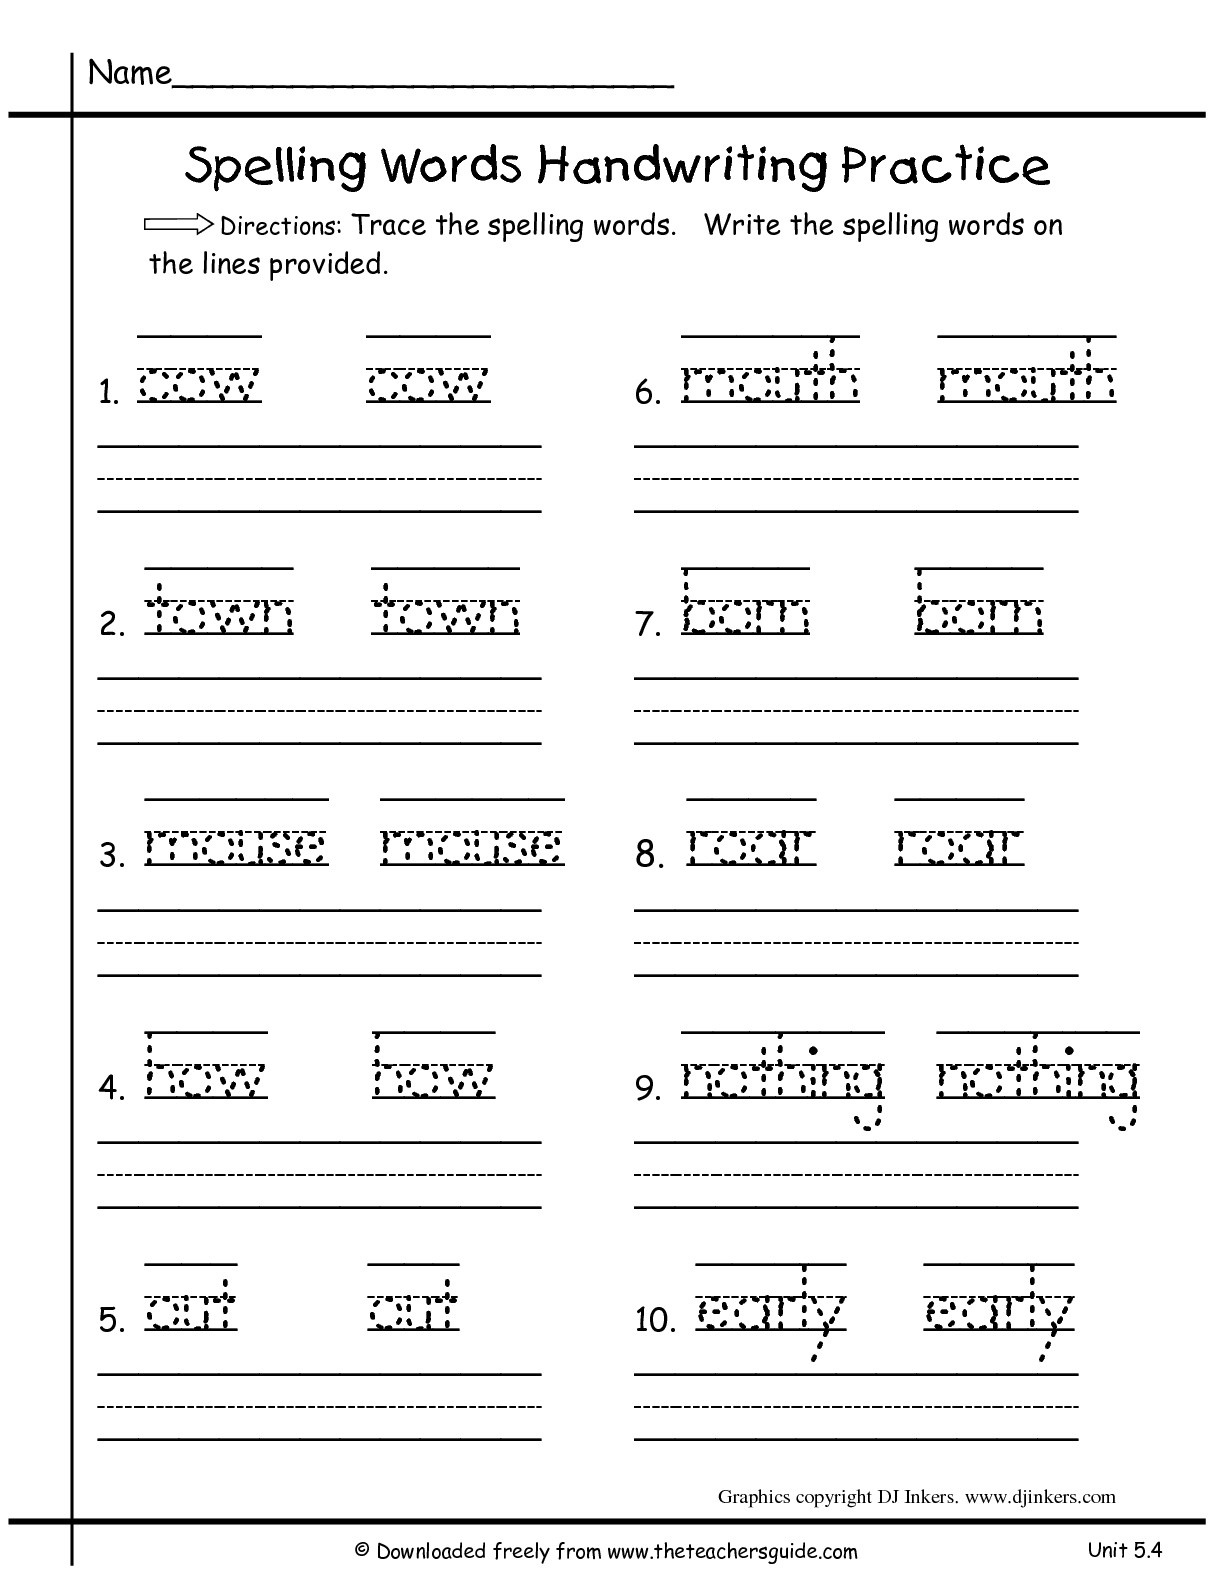 Writing English Essay. I Want To Pay To Do My Essay, Please Help How - Free Printable Language Arts Worksheets For 1St Grade